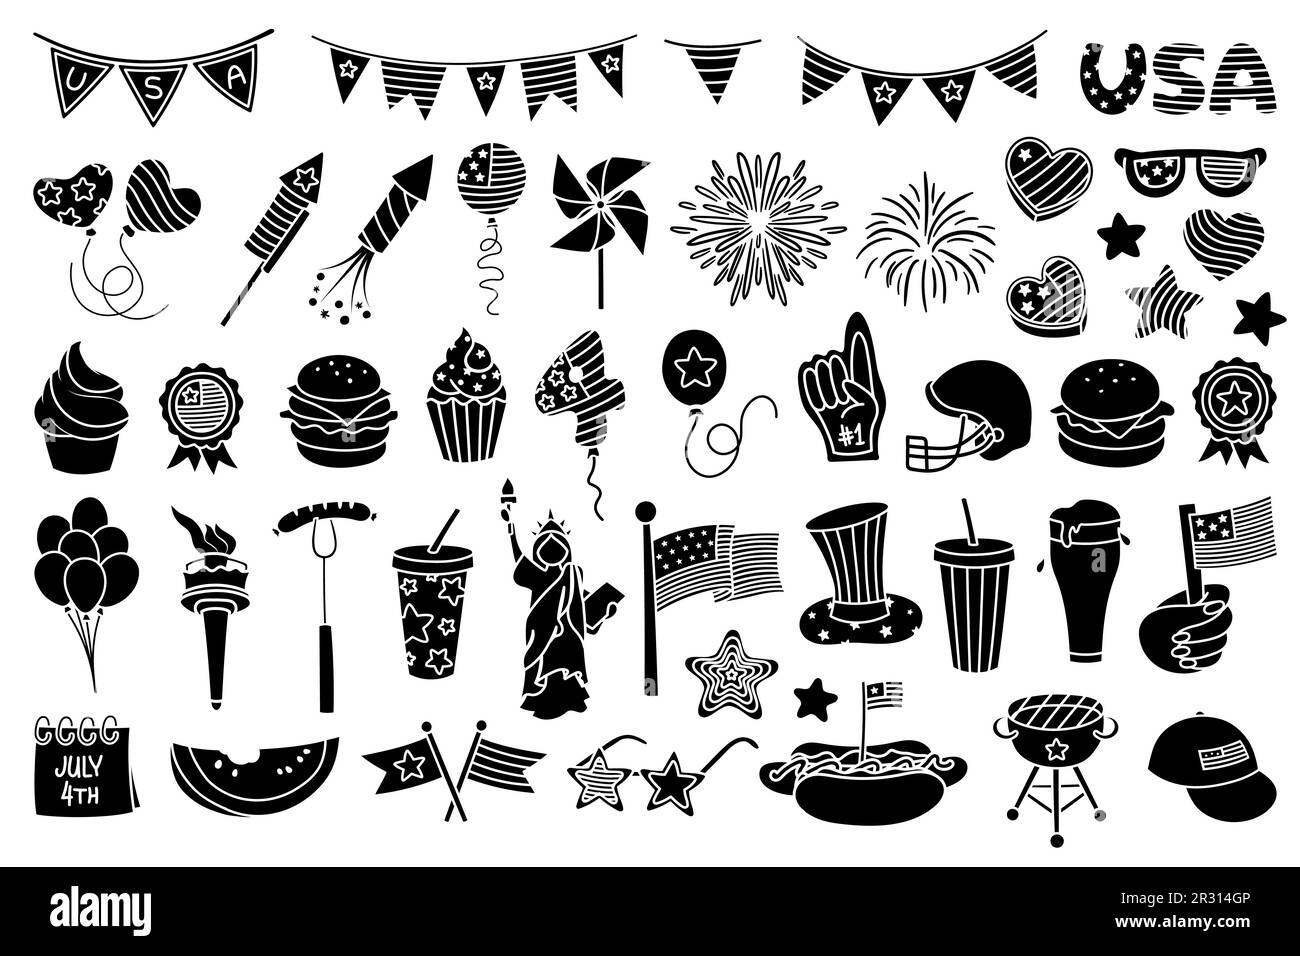 4th of July, Independence Day of United States of America celebration themed illustrations, hand drawn vector elements and objects. Black icon style. Stock Vector